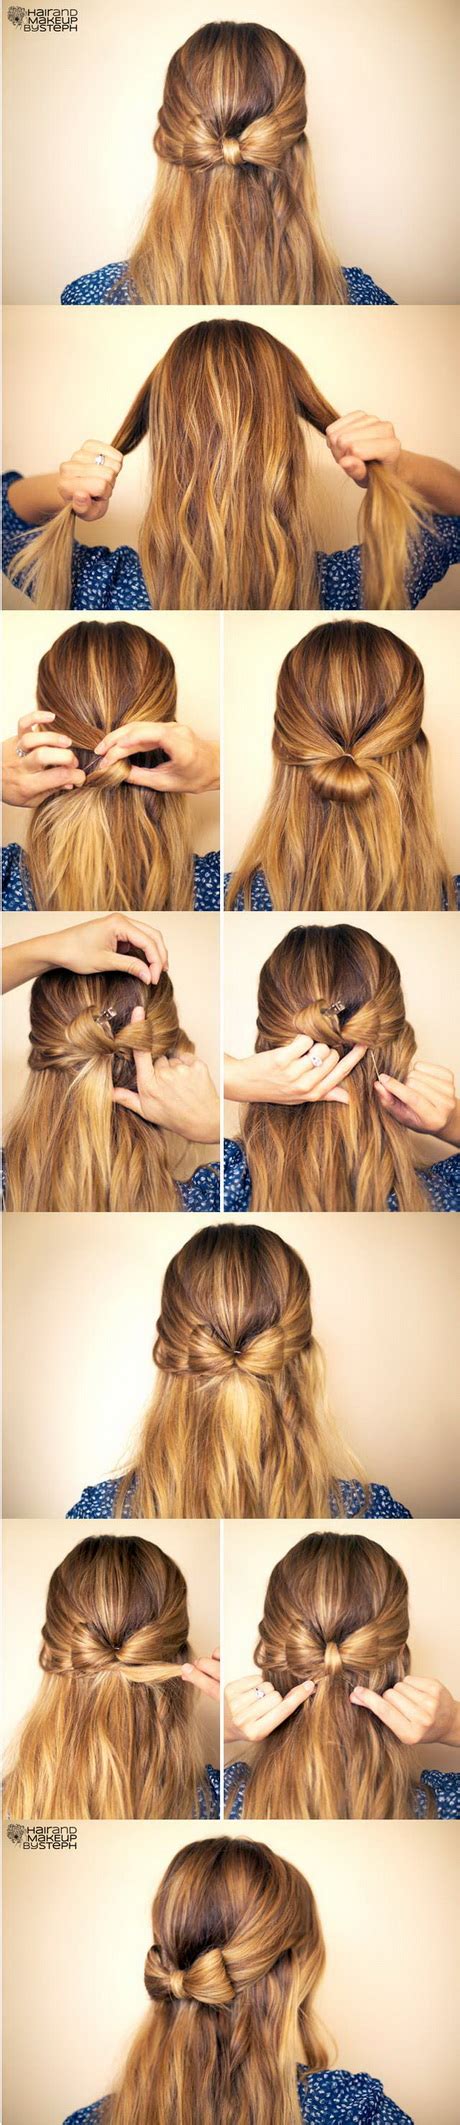 Cute below, you have step by step easy and quick braided hairstyle tutorials. Easy step by step hairstyles for long hair